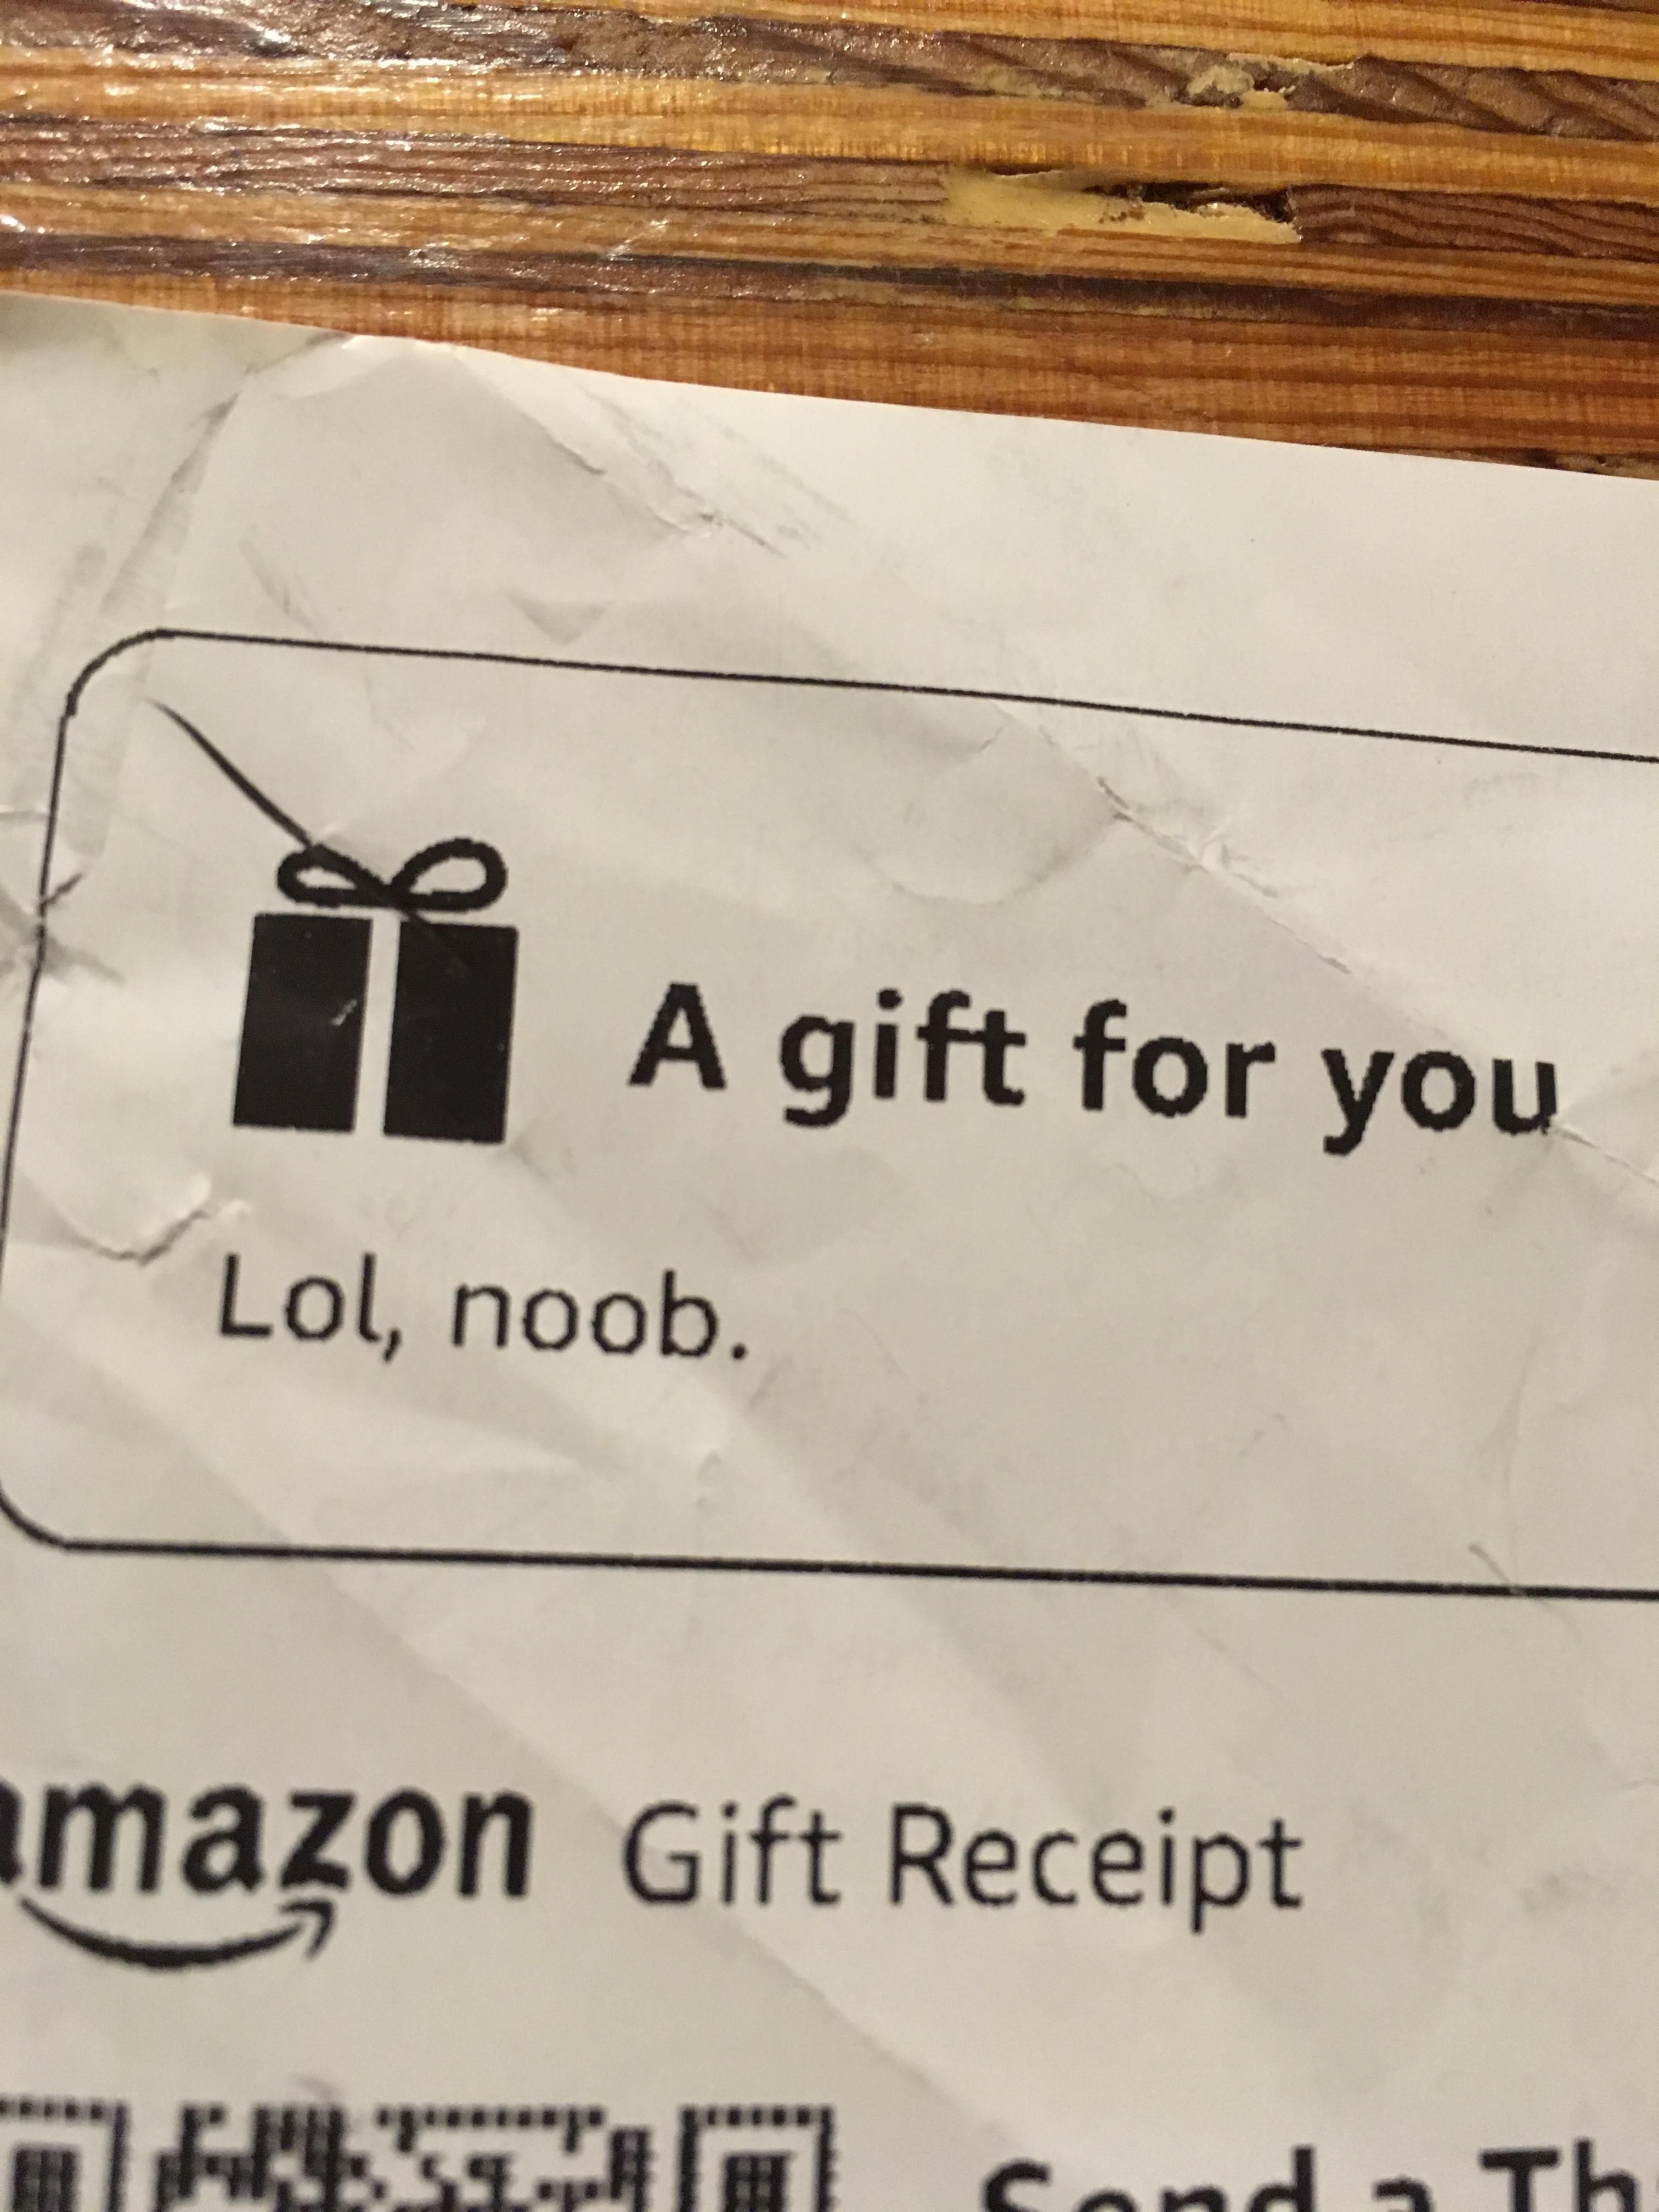 My dad is nearly 70 and not especially computer savvy. However, he learned "an internet saying" and put it on my Amazon Christmas gift receipt.